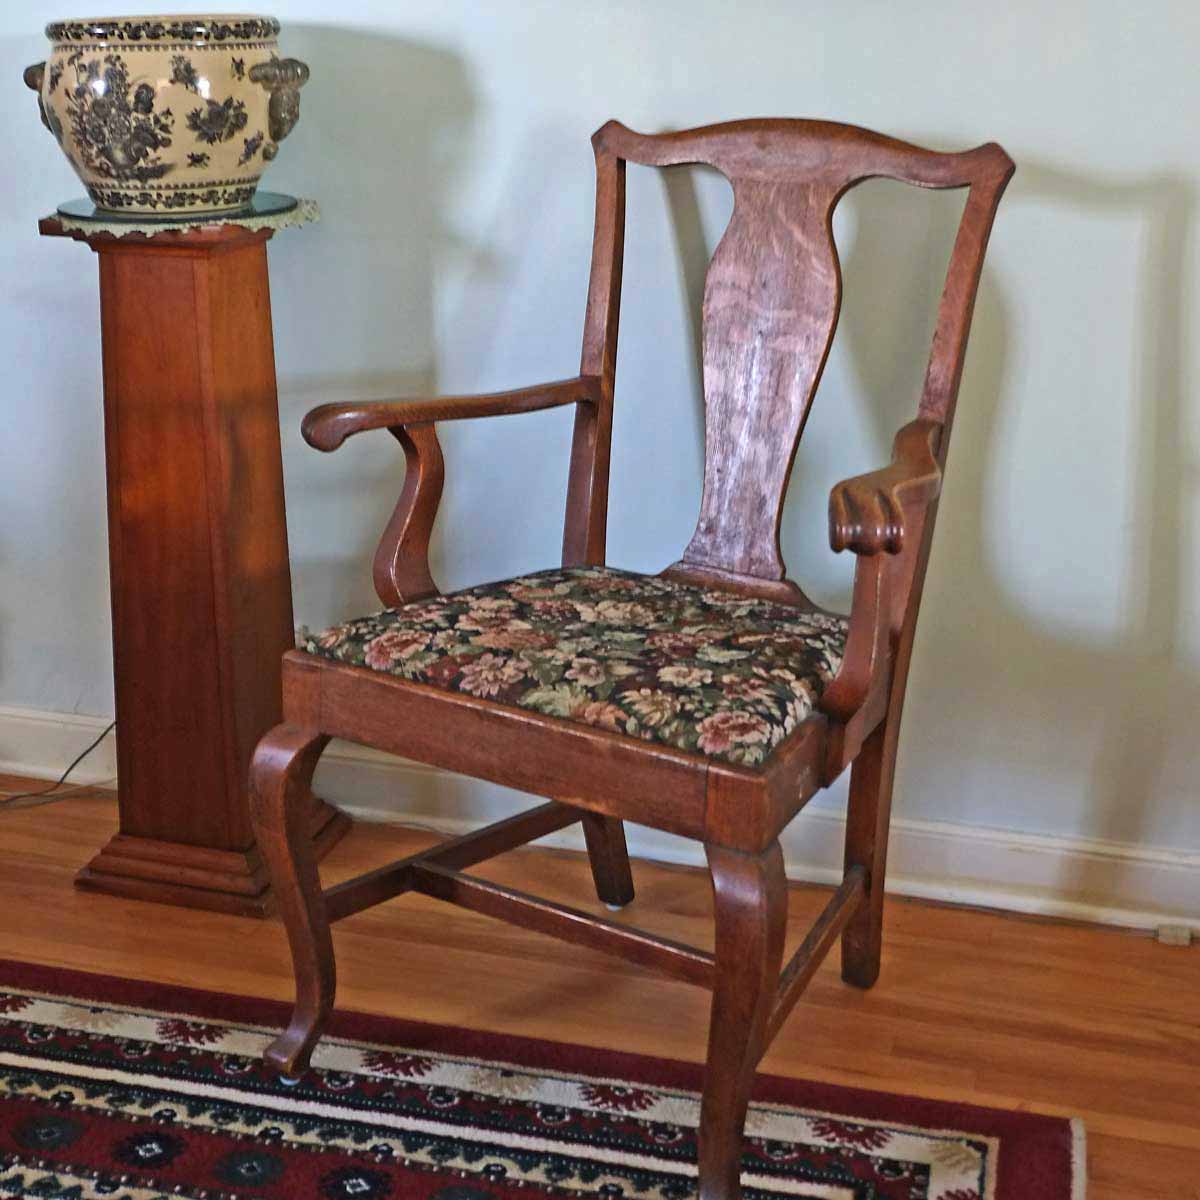 photo of 1087 Armchairs, purchased by Cass Gilbert for the 1905 Minnesota State Capitol, carved wood with fabric cushion seat cover, pair located in South St, Paul, Minnesota